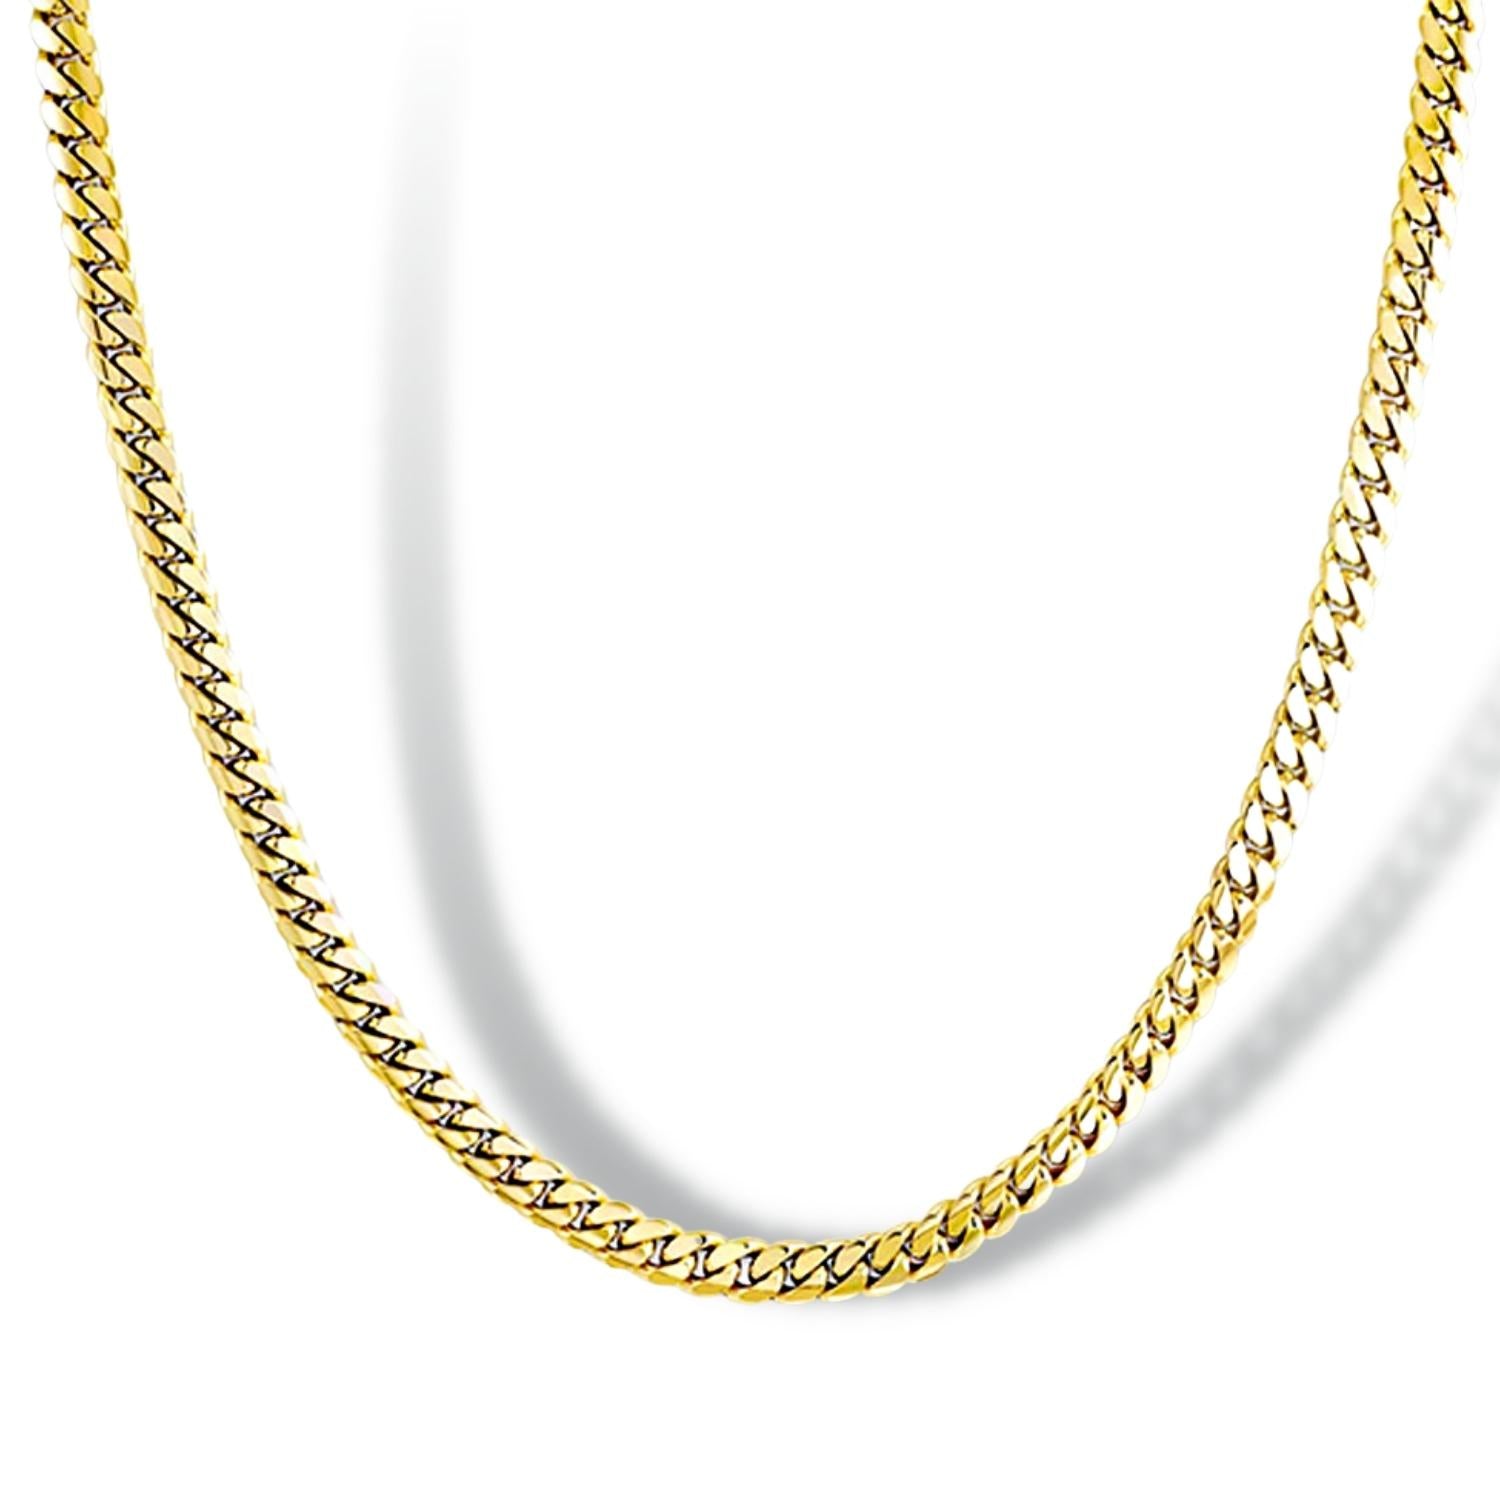 Solid Yellow Gold Miami Cuban Chain 7.6mm Width